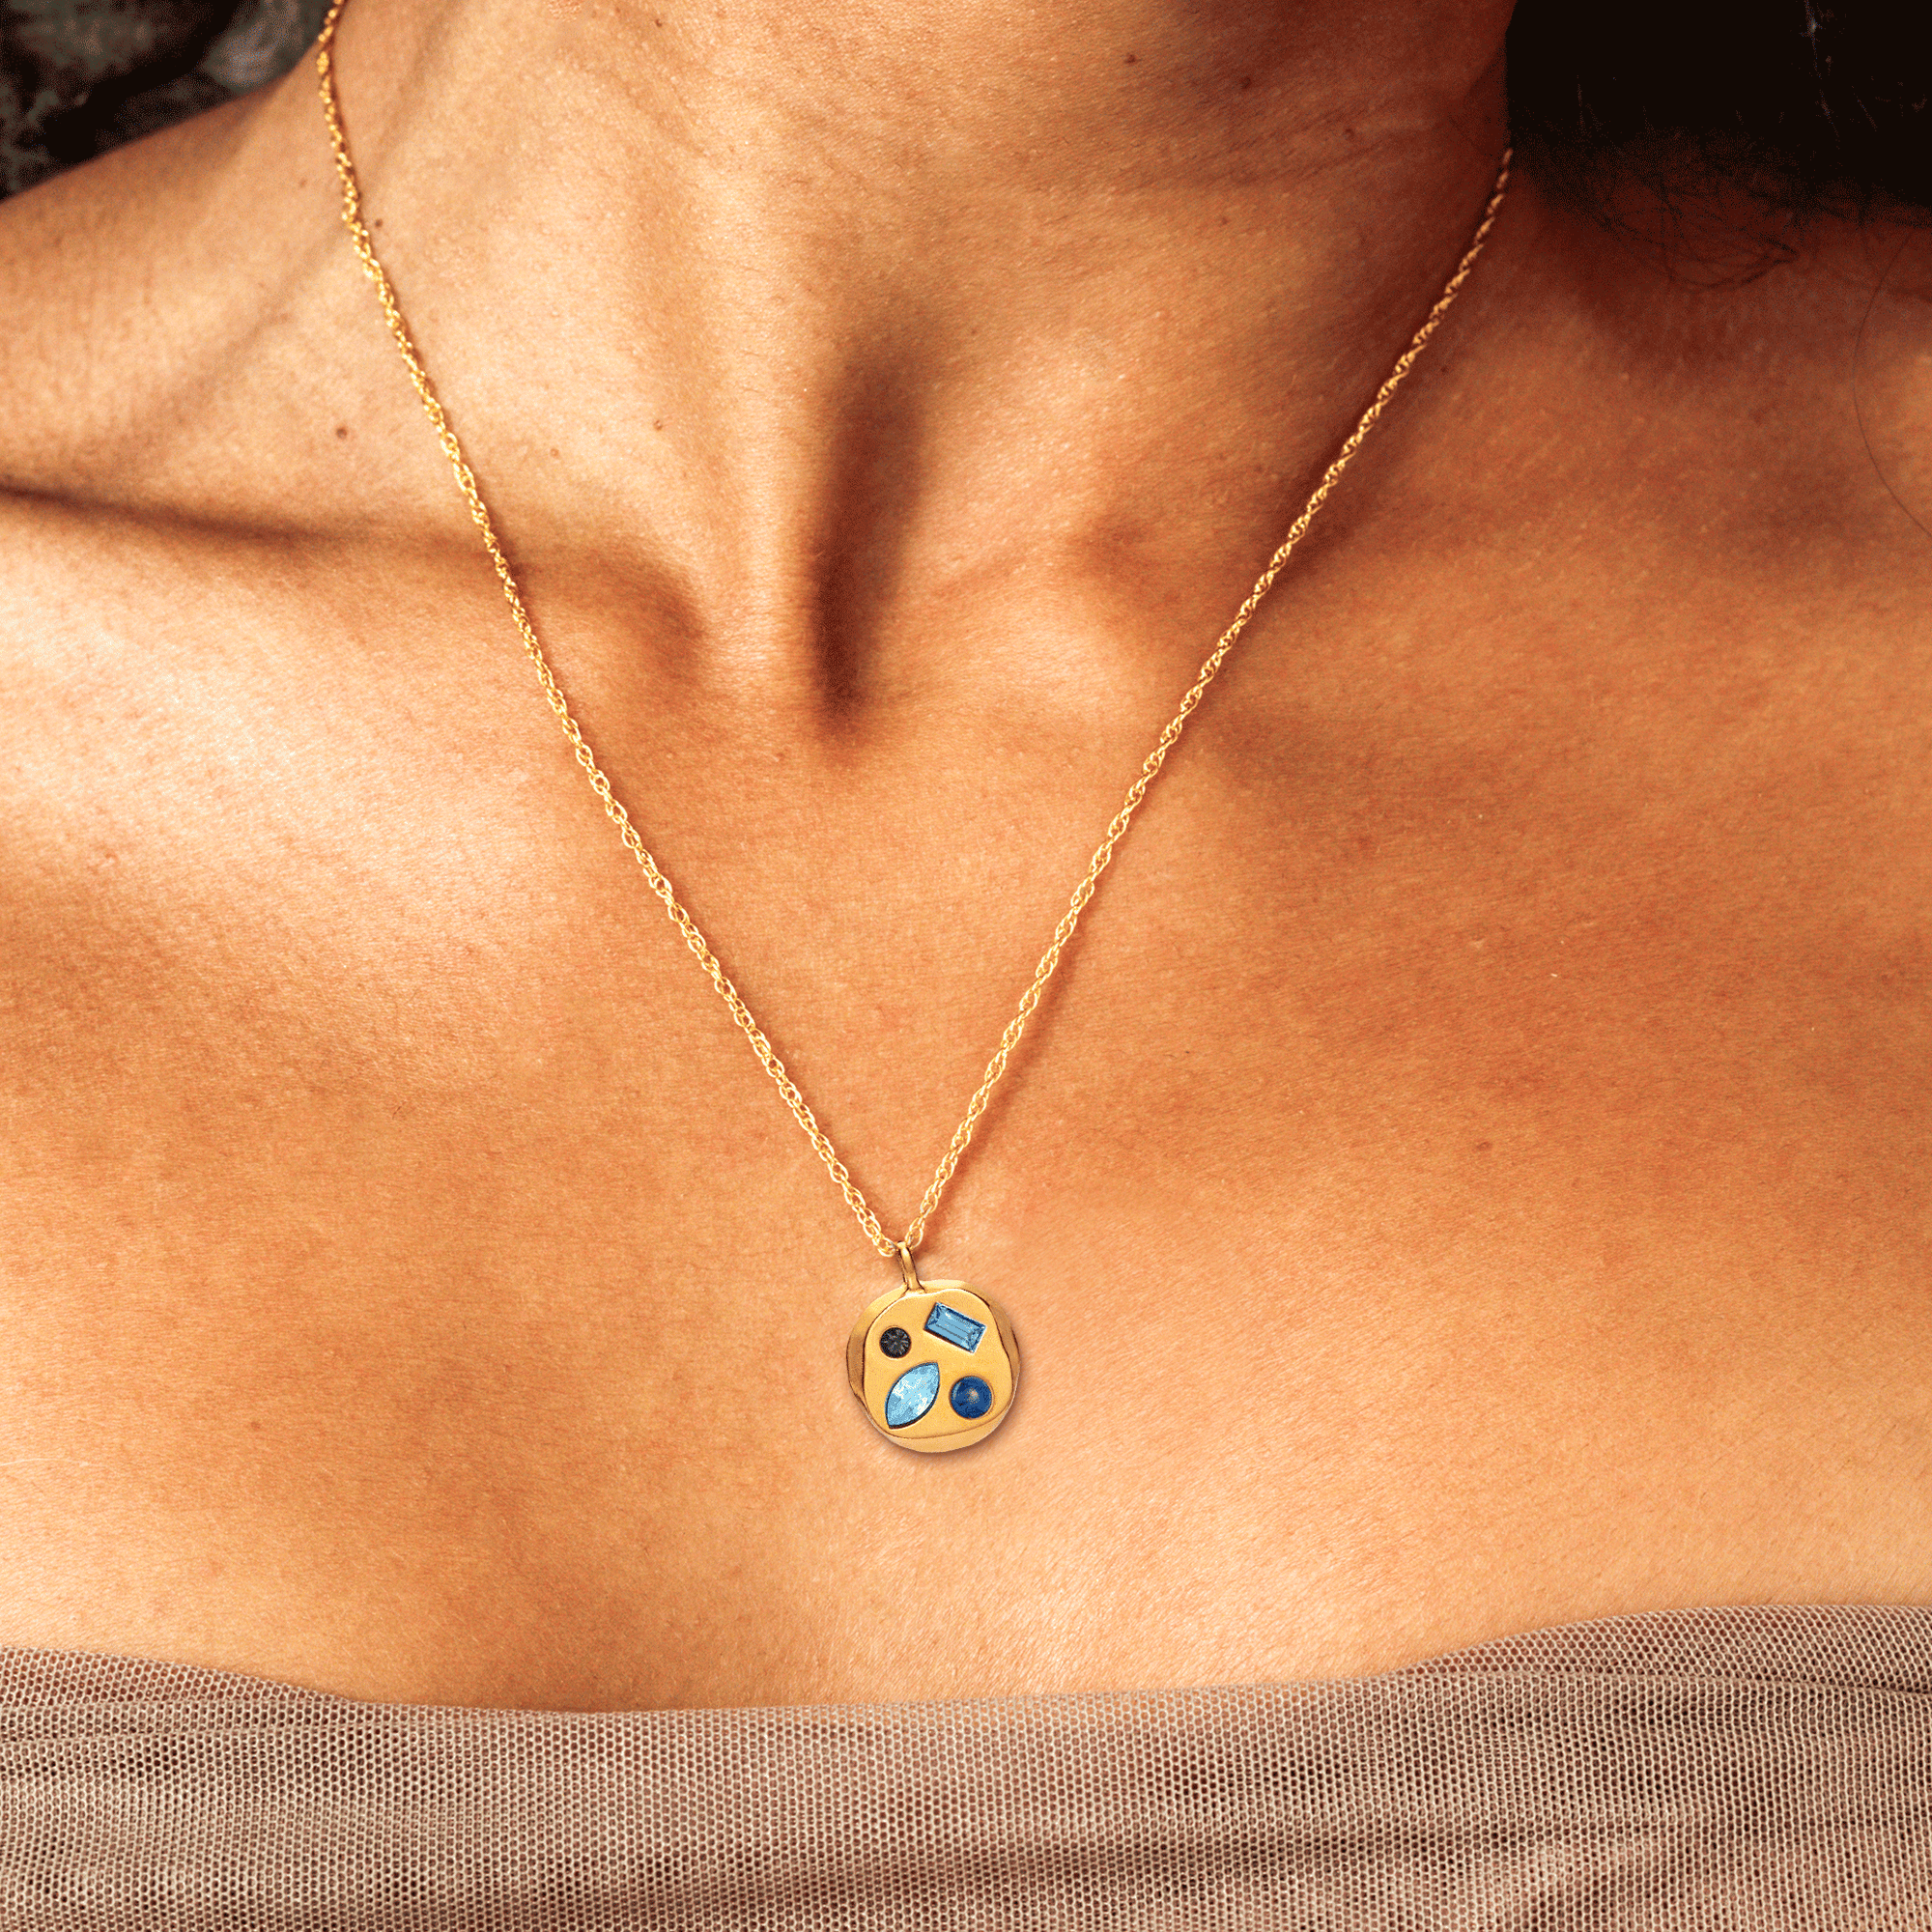 Person wearing The December Thirtieth Pendant